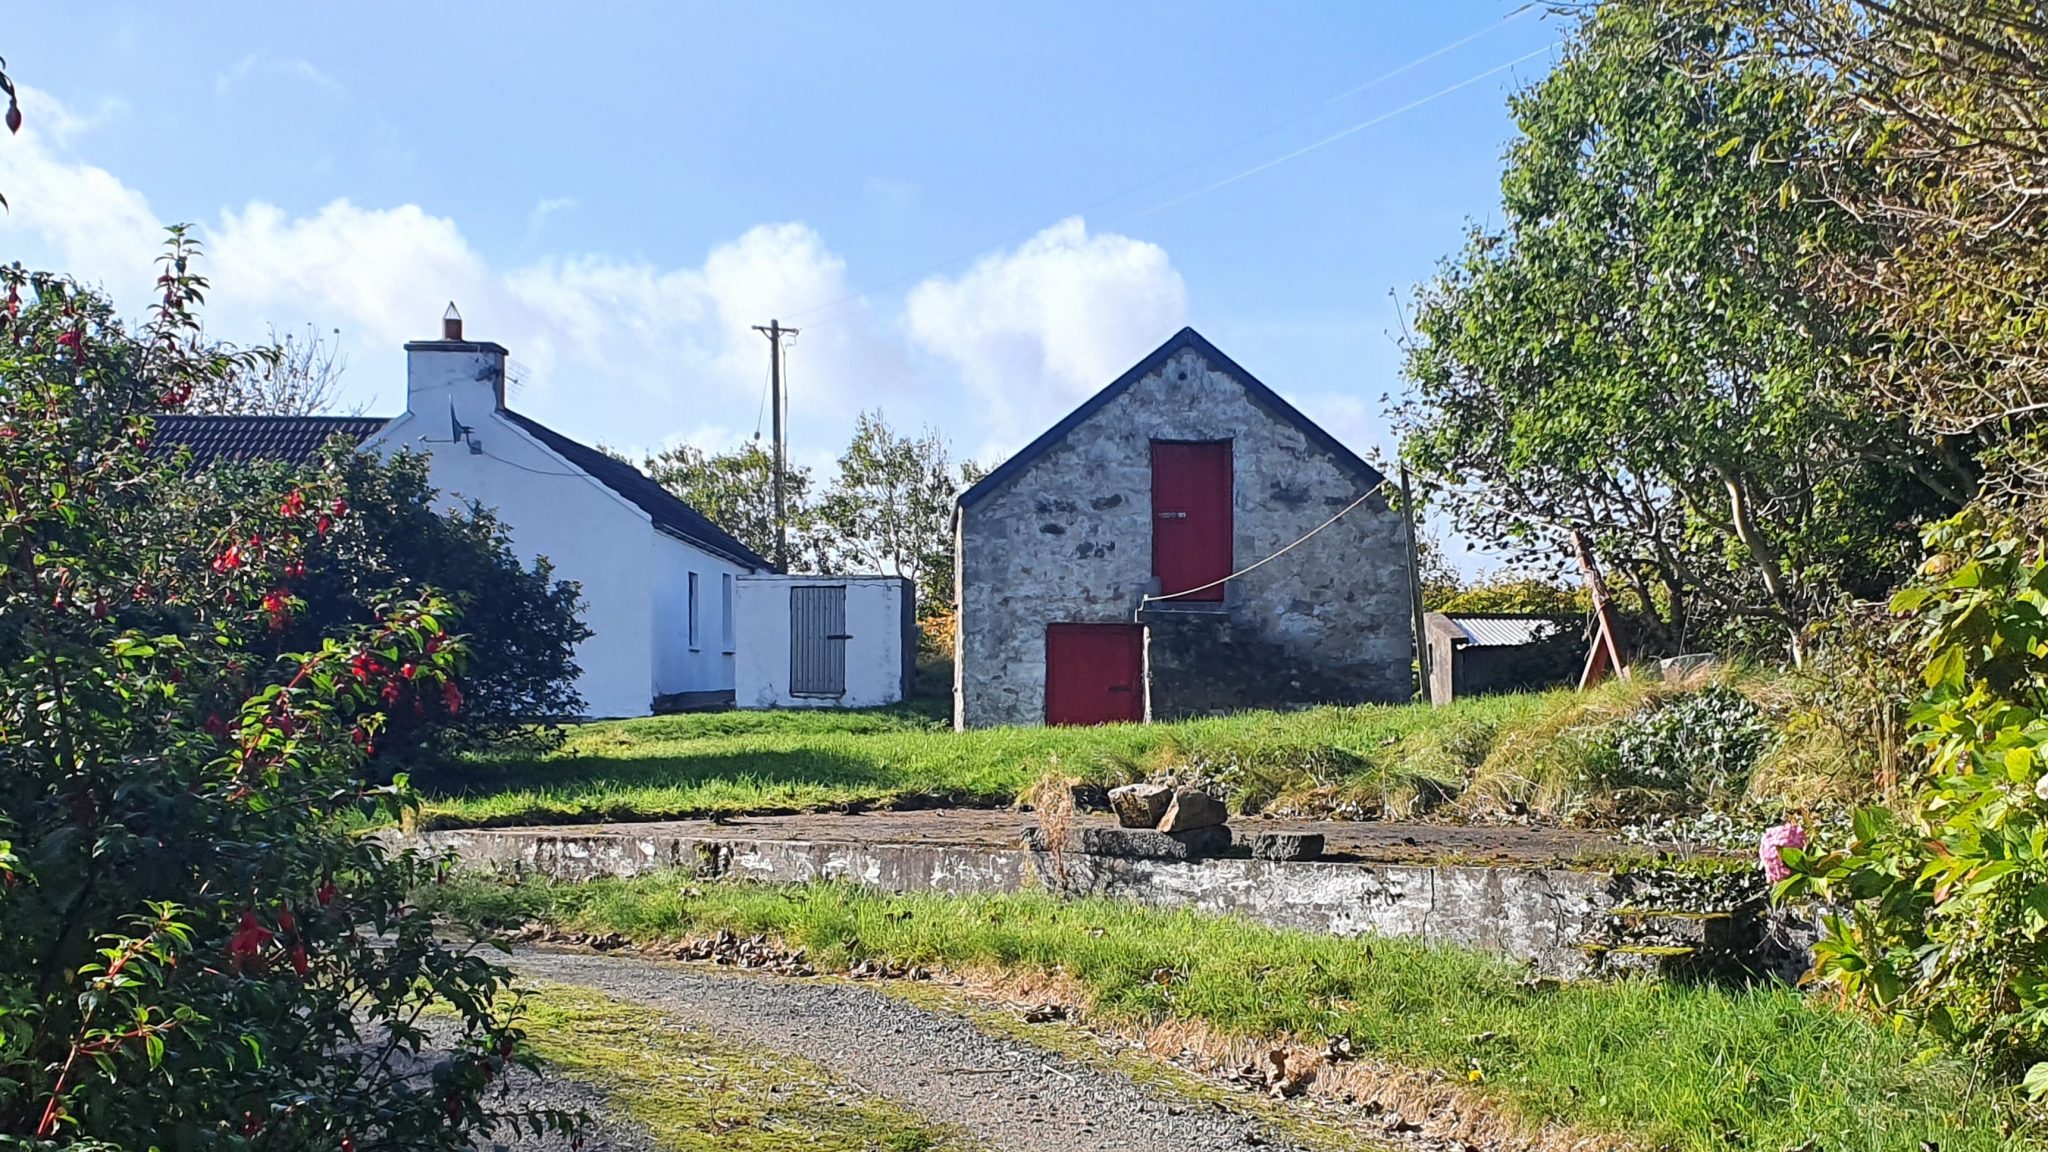 Traditional Style House on a 3 acre site in Lower Keadue, Burtonport.